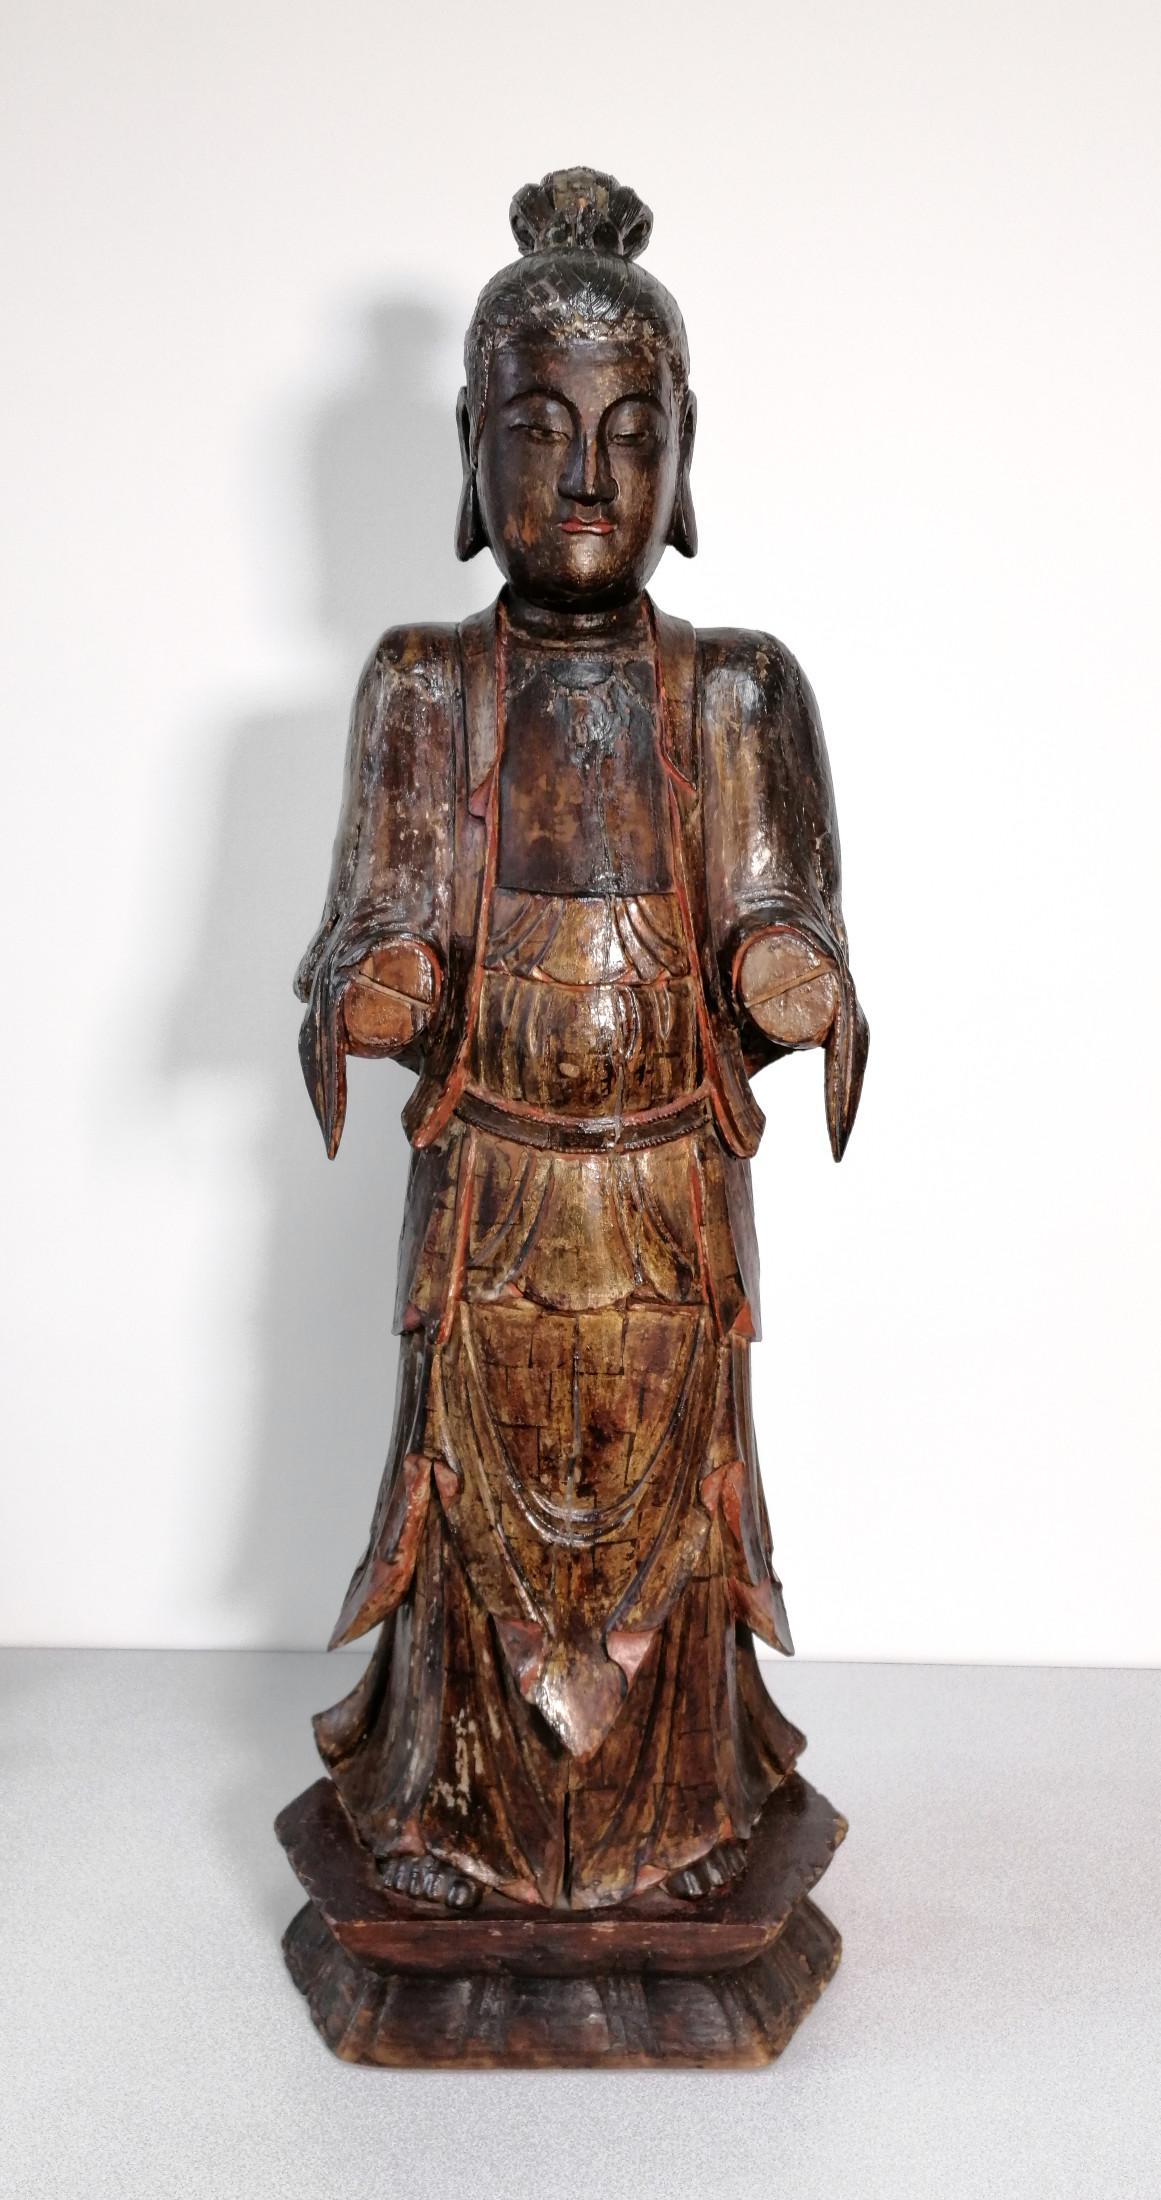 Chinese Ancient Wooden Sculpture of the Goddess Guan Yin, China, 17th / 18th Century